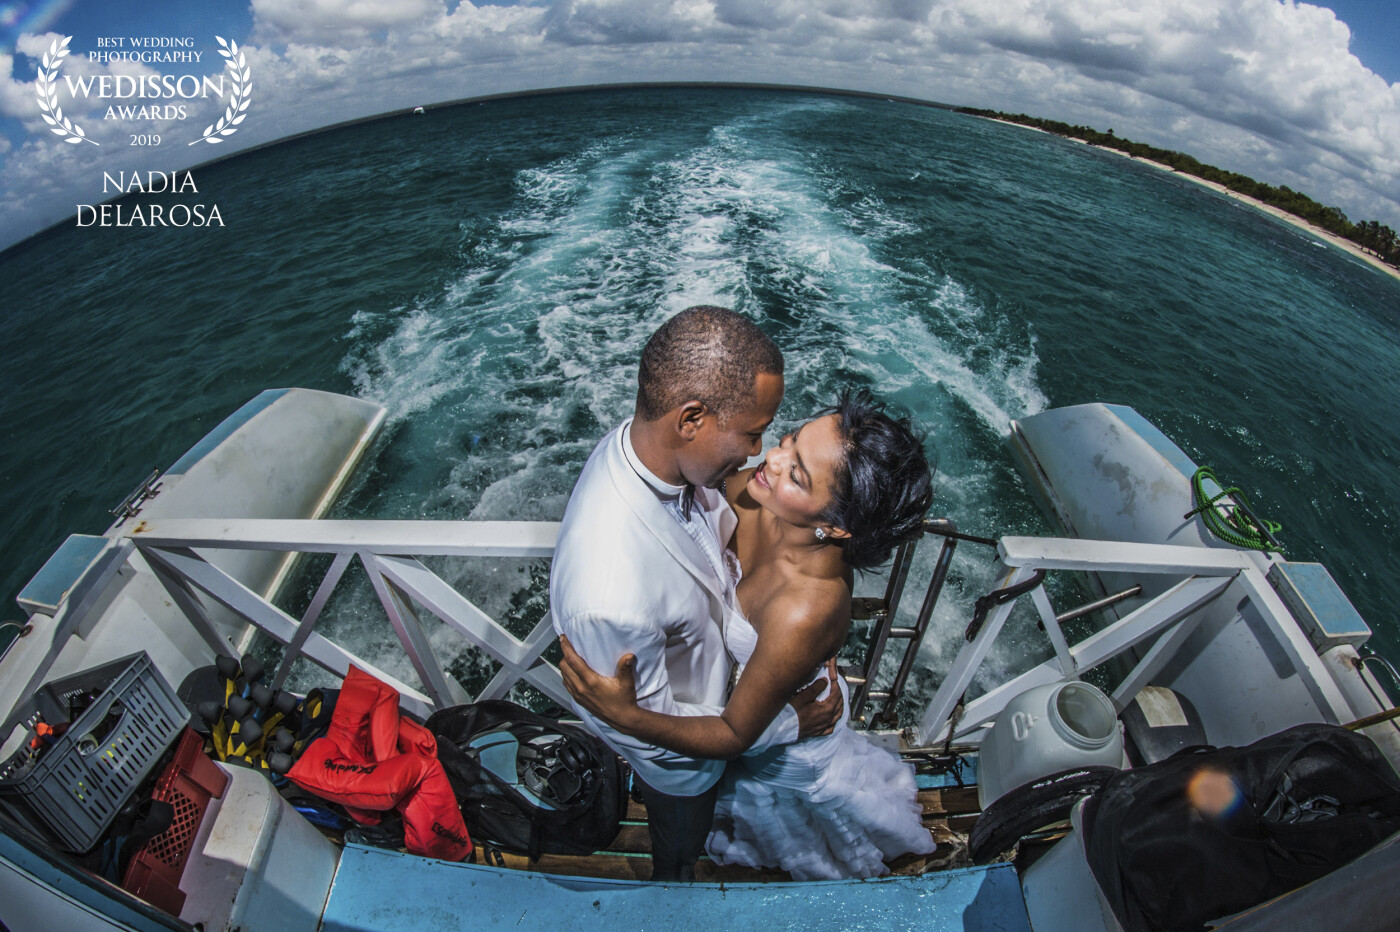 This image was quite a journey, the heat was about 30 degrees Celsius and we embarked on a trip to La Isla Catalina, which is located east of the Dominican Republic. The Bride and the groom were in the best attitude so that we could achieve the best images that day. Do not impede the amount of people who were on the boat, they were willing to do everything for their best love story.<br />
Today they always remember that magic day in their lives that was narrated in the best way by us The Dreams Storytelling.